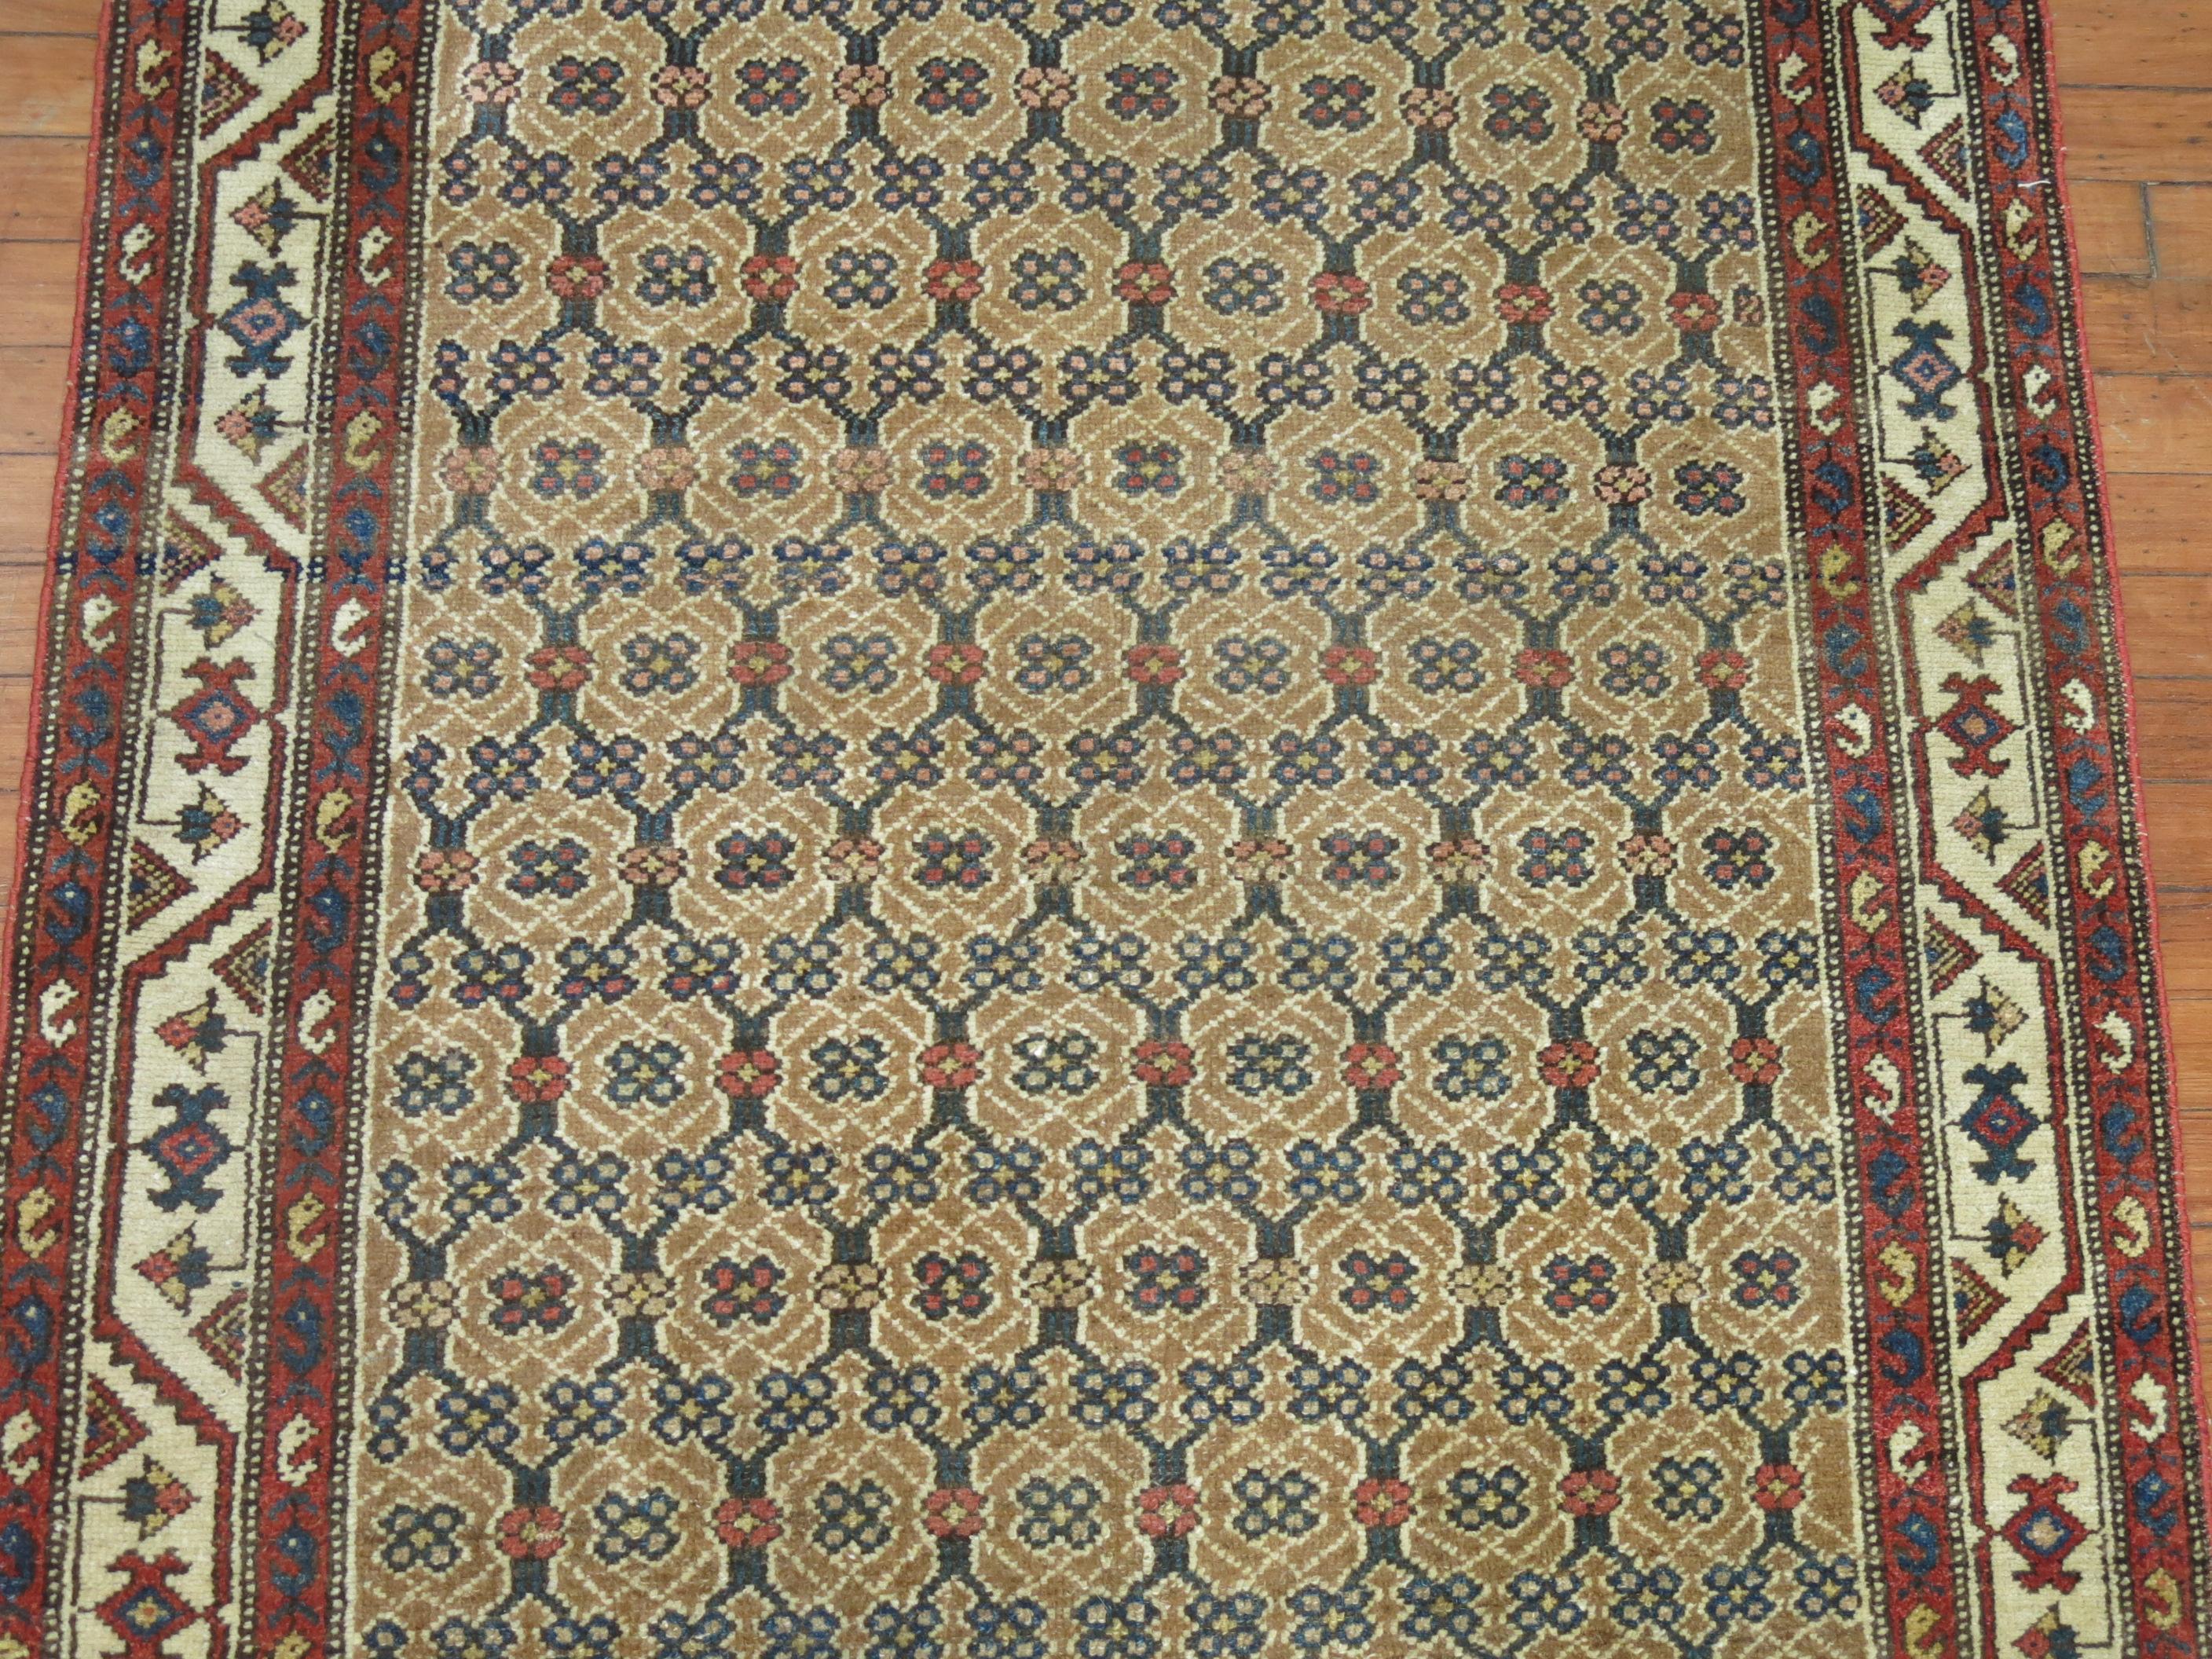 20th Century Tribal Camel Color Antiqie Persian Runner